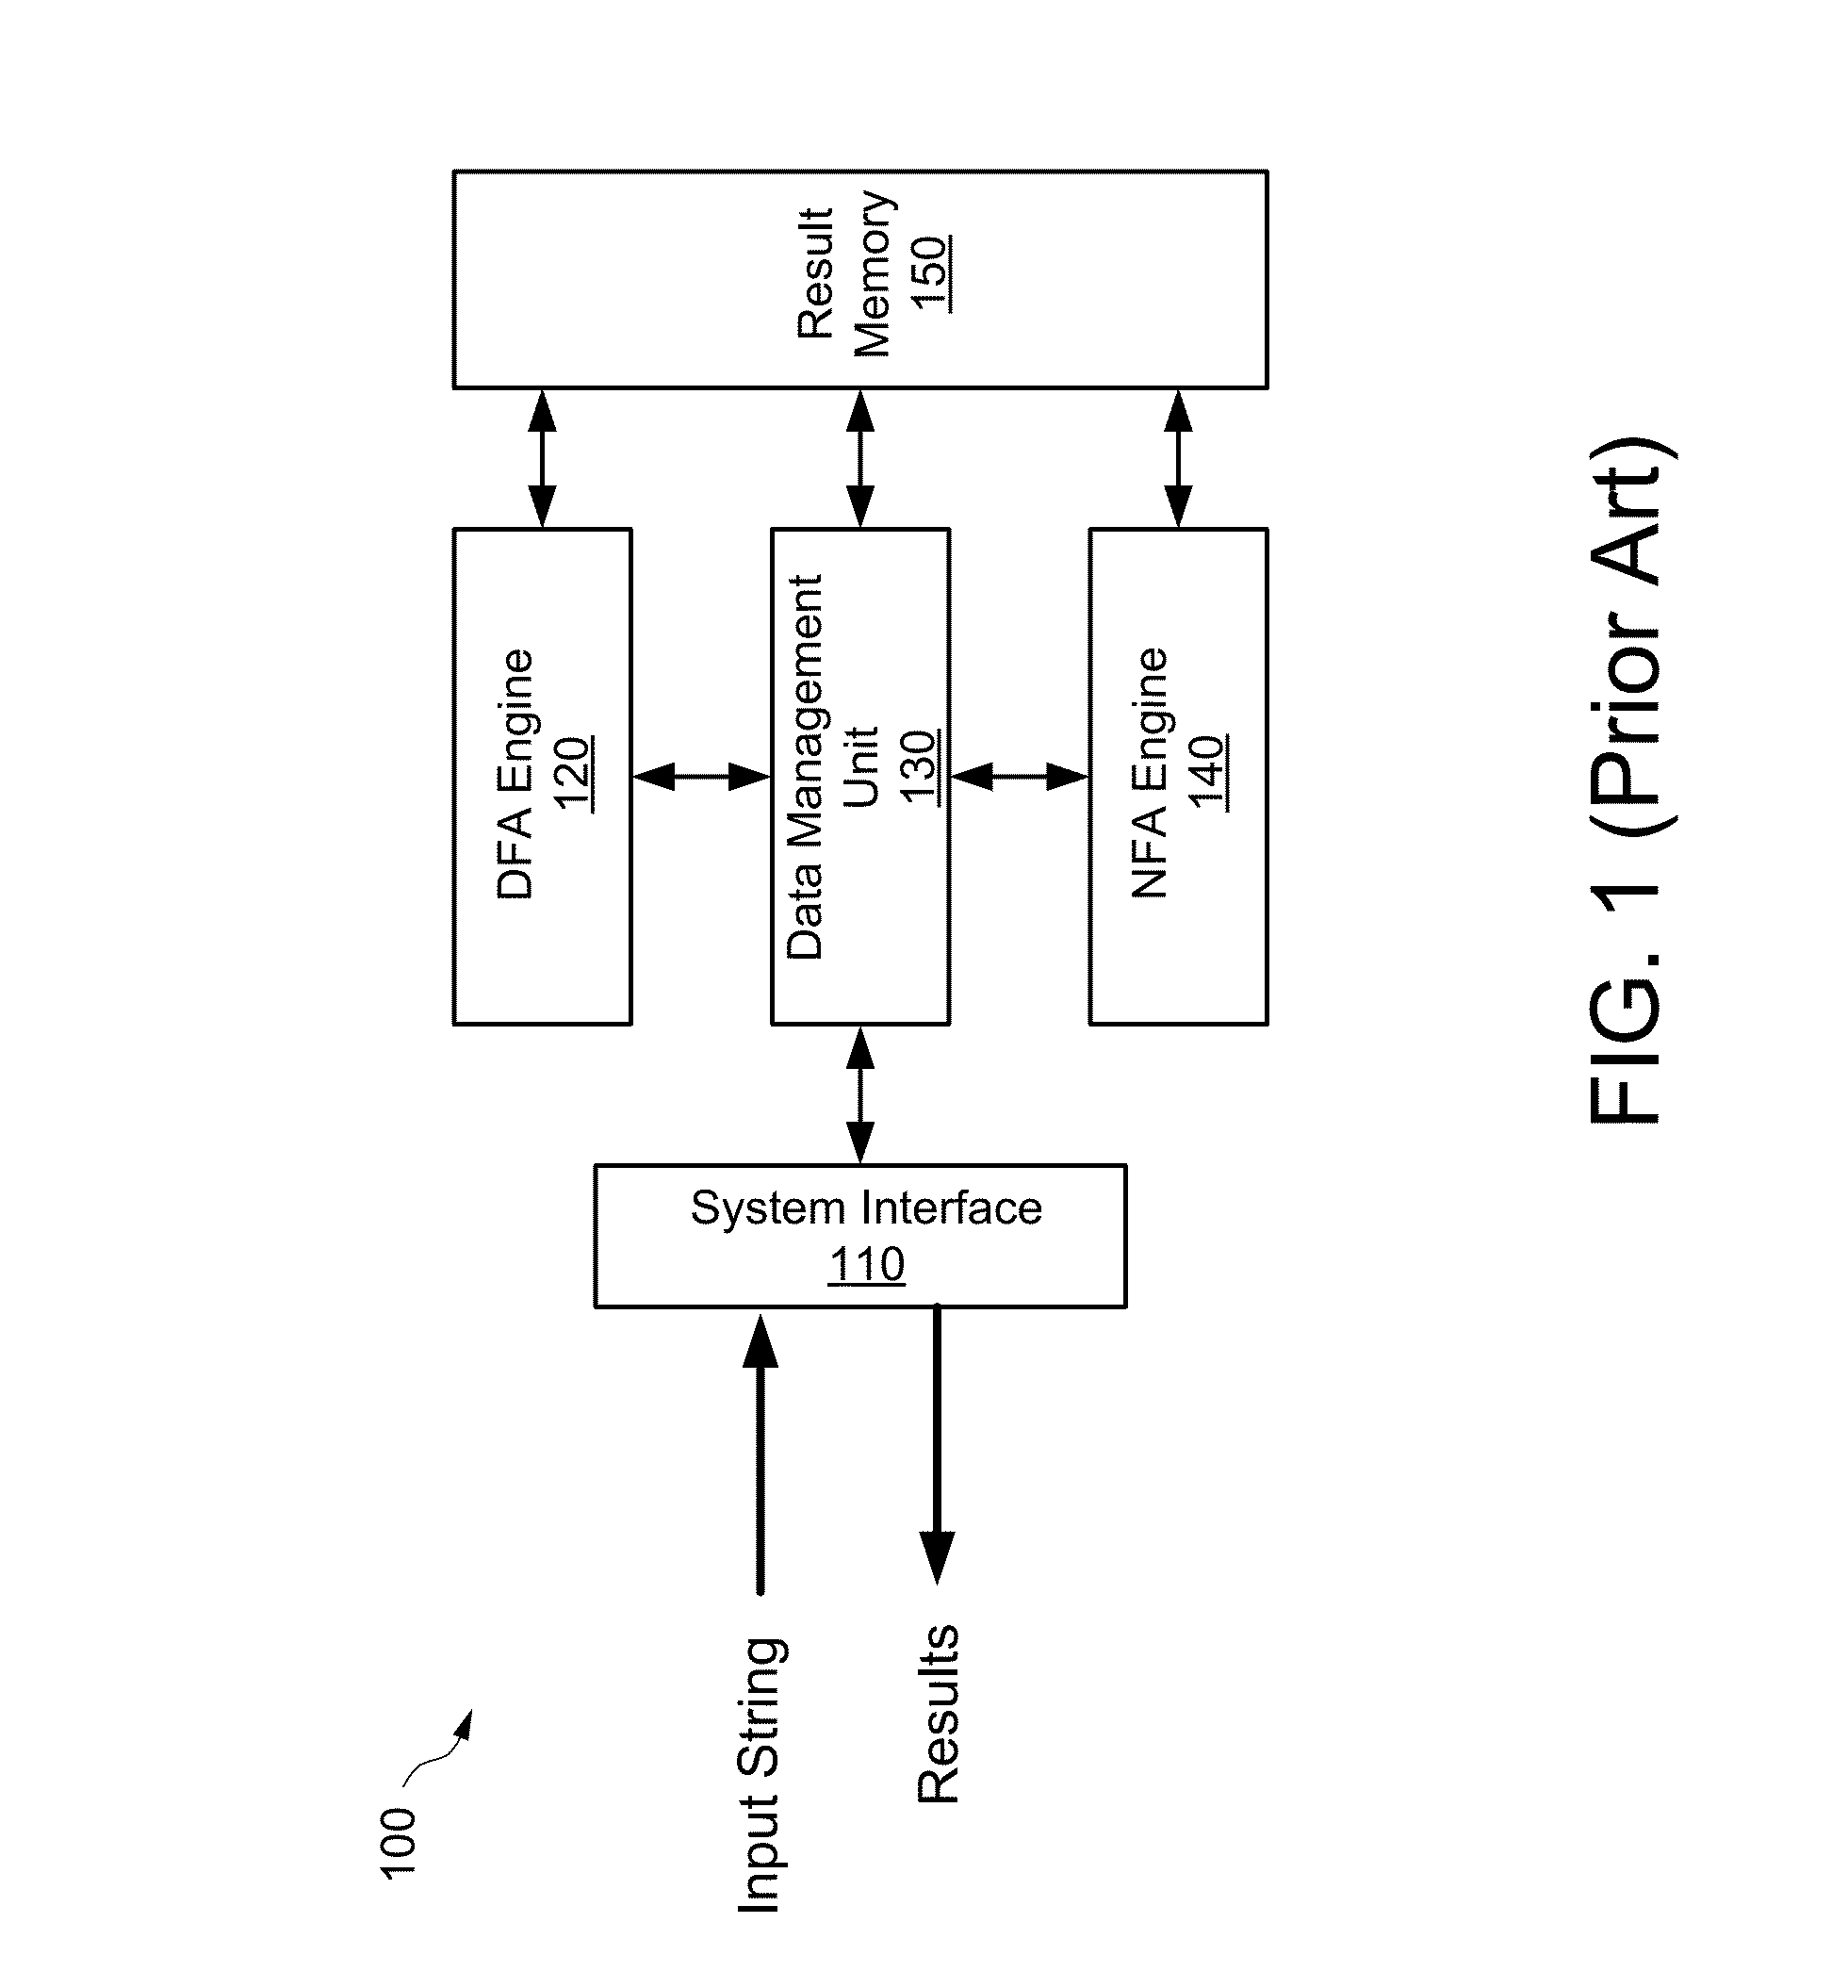 Token stitcher for a content search system having pipelined engines